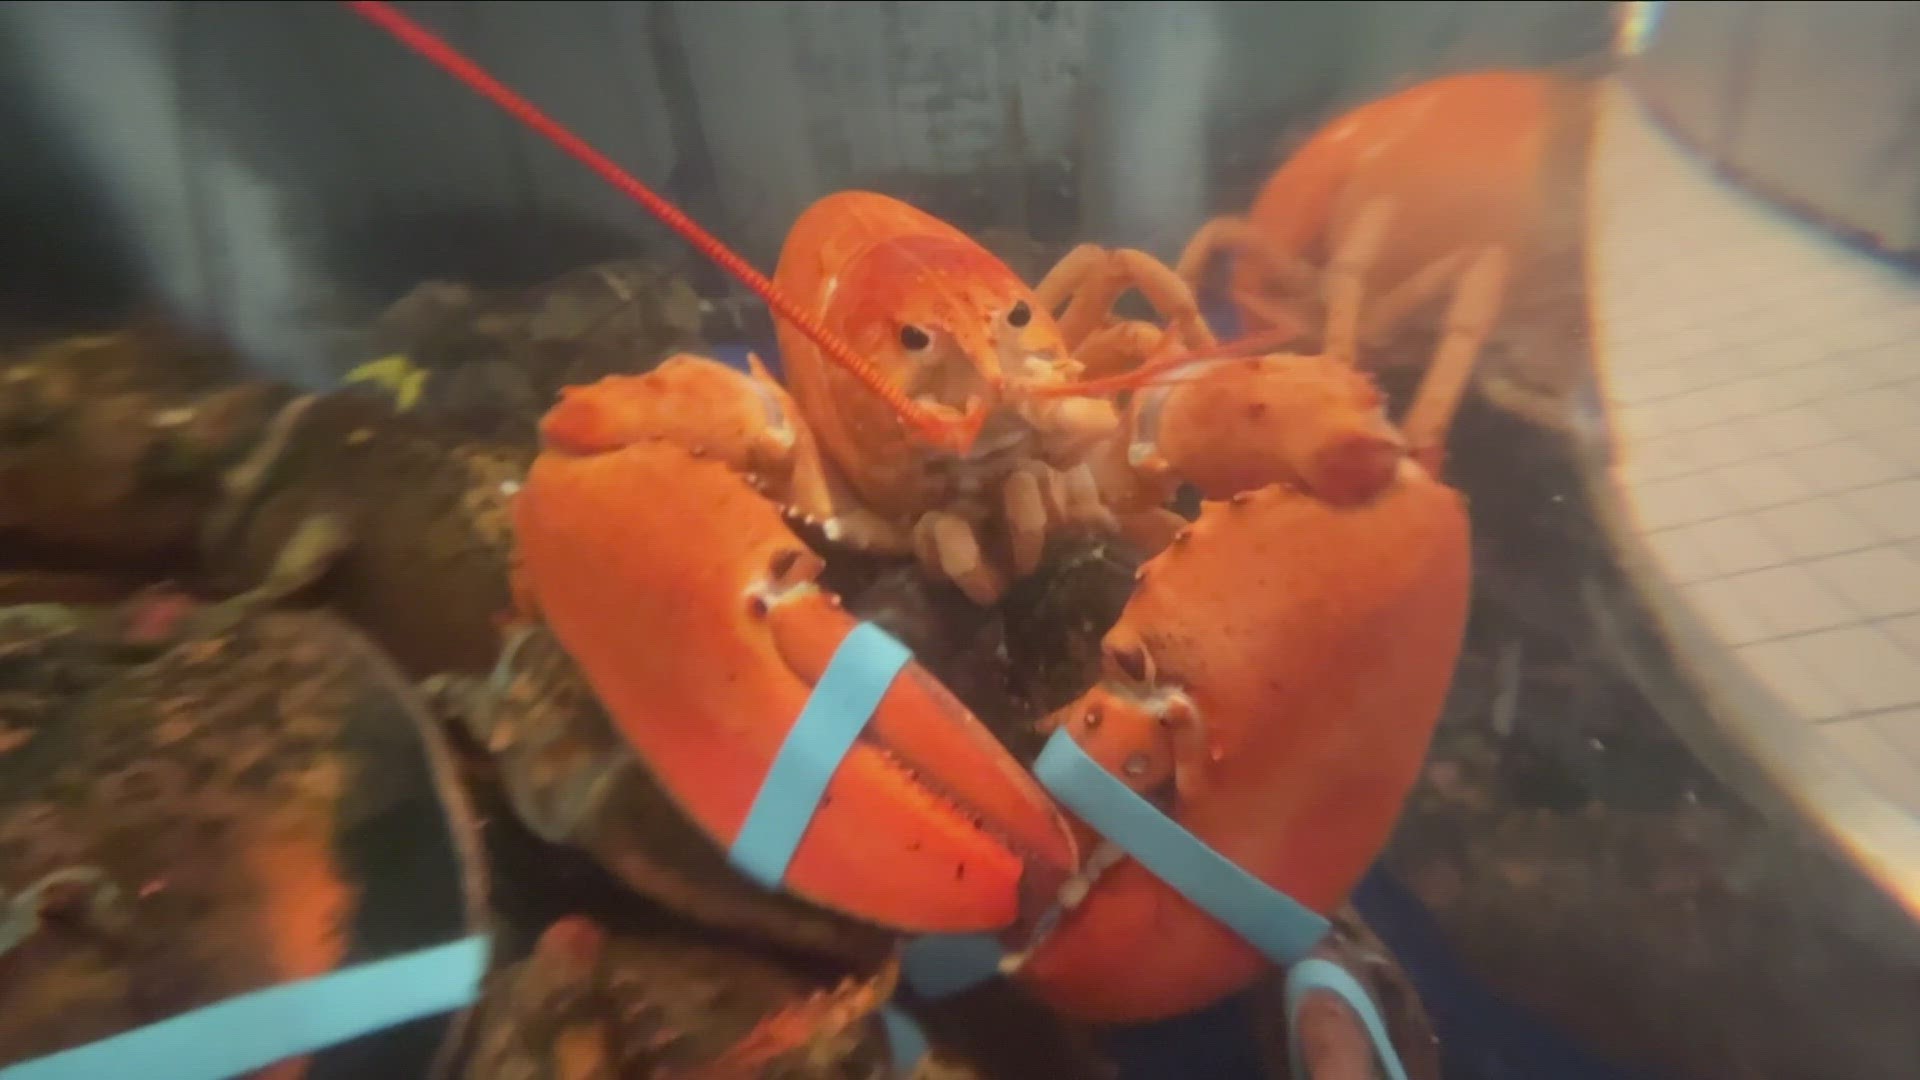 Hayes Seafood in Williamsville finds rare orange lobster in a shipment from Boston, MA